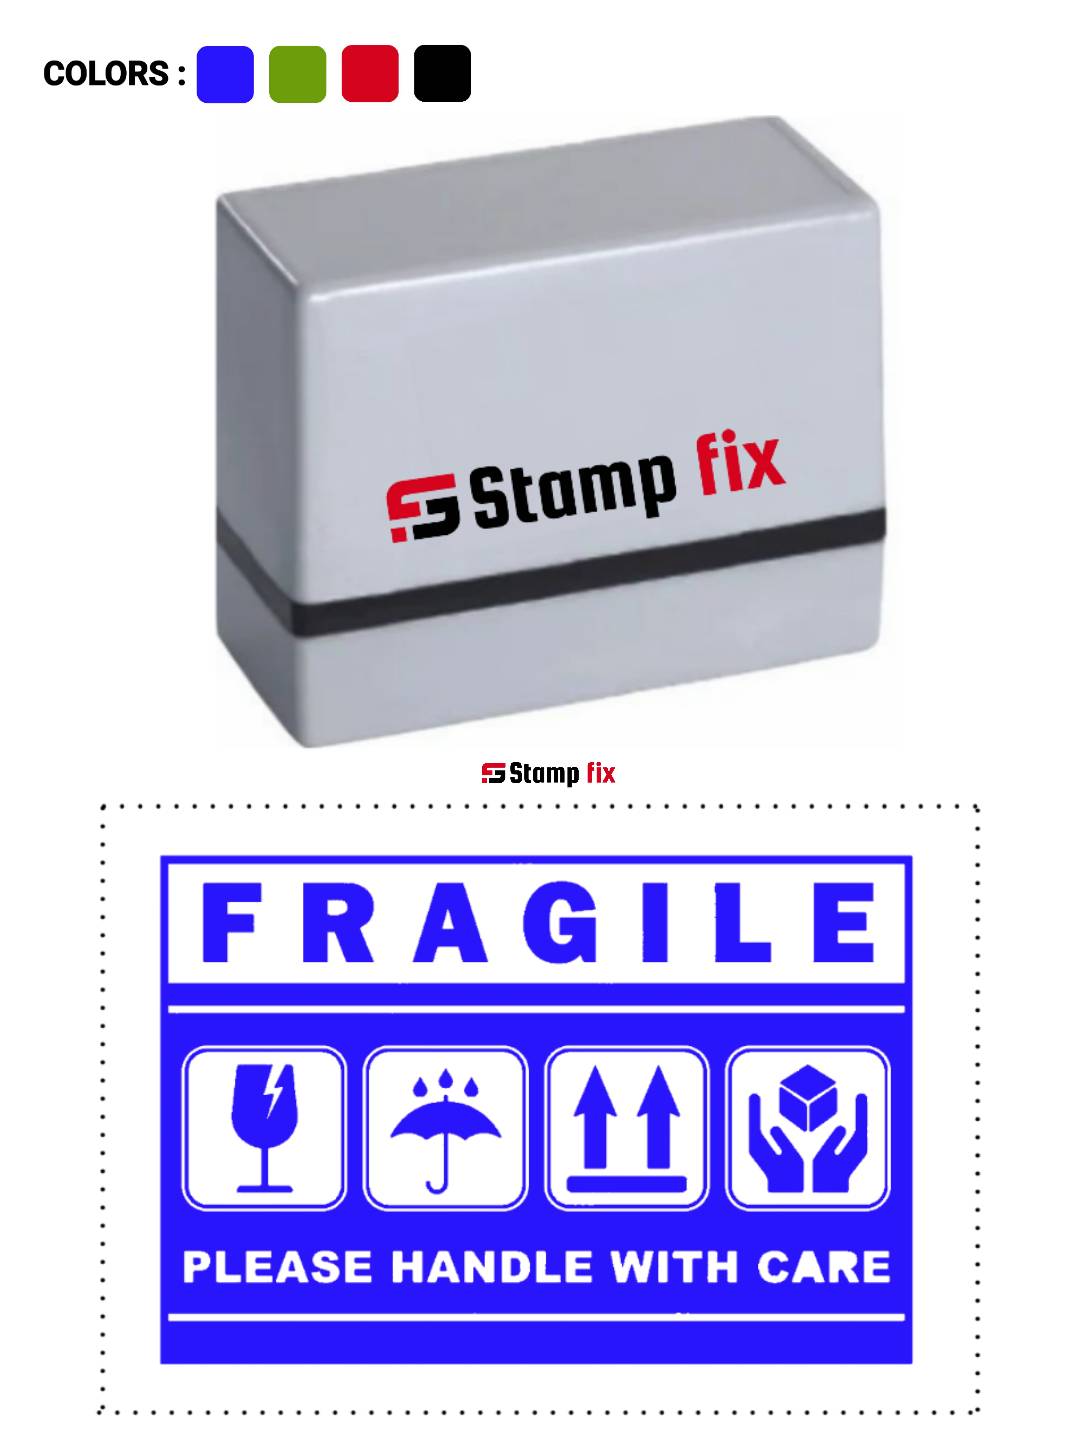 Pre Ink Fragile stamp, cartoon box stamp, amazon stamp, glass ware stamp, warning stamp, Stamp by StampFix, a self-inking stamp with high-quality impressions
in India, nylon stamp, rubber stamp, pre ink stamp, polymer stamp, urgent stamp